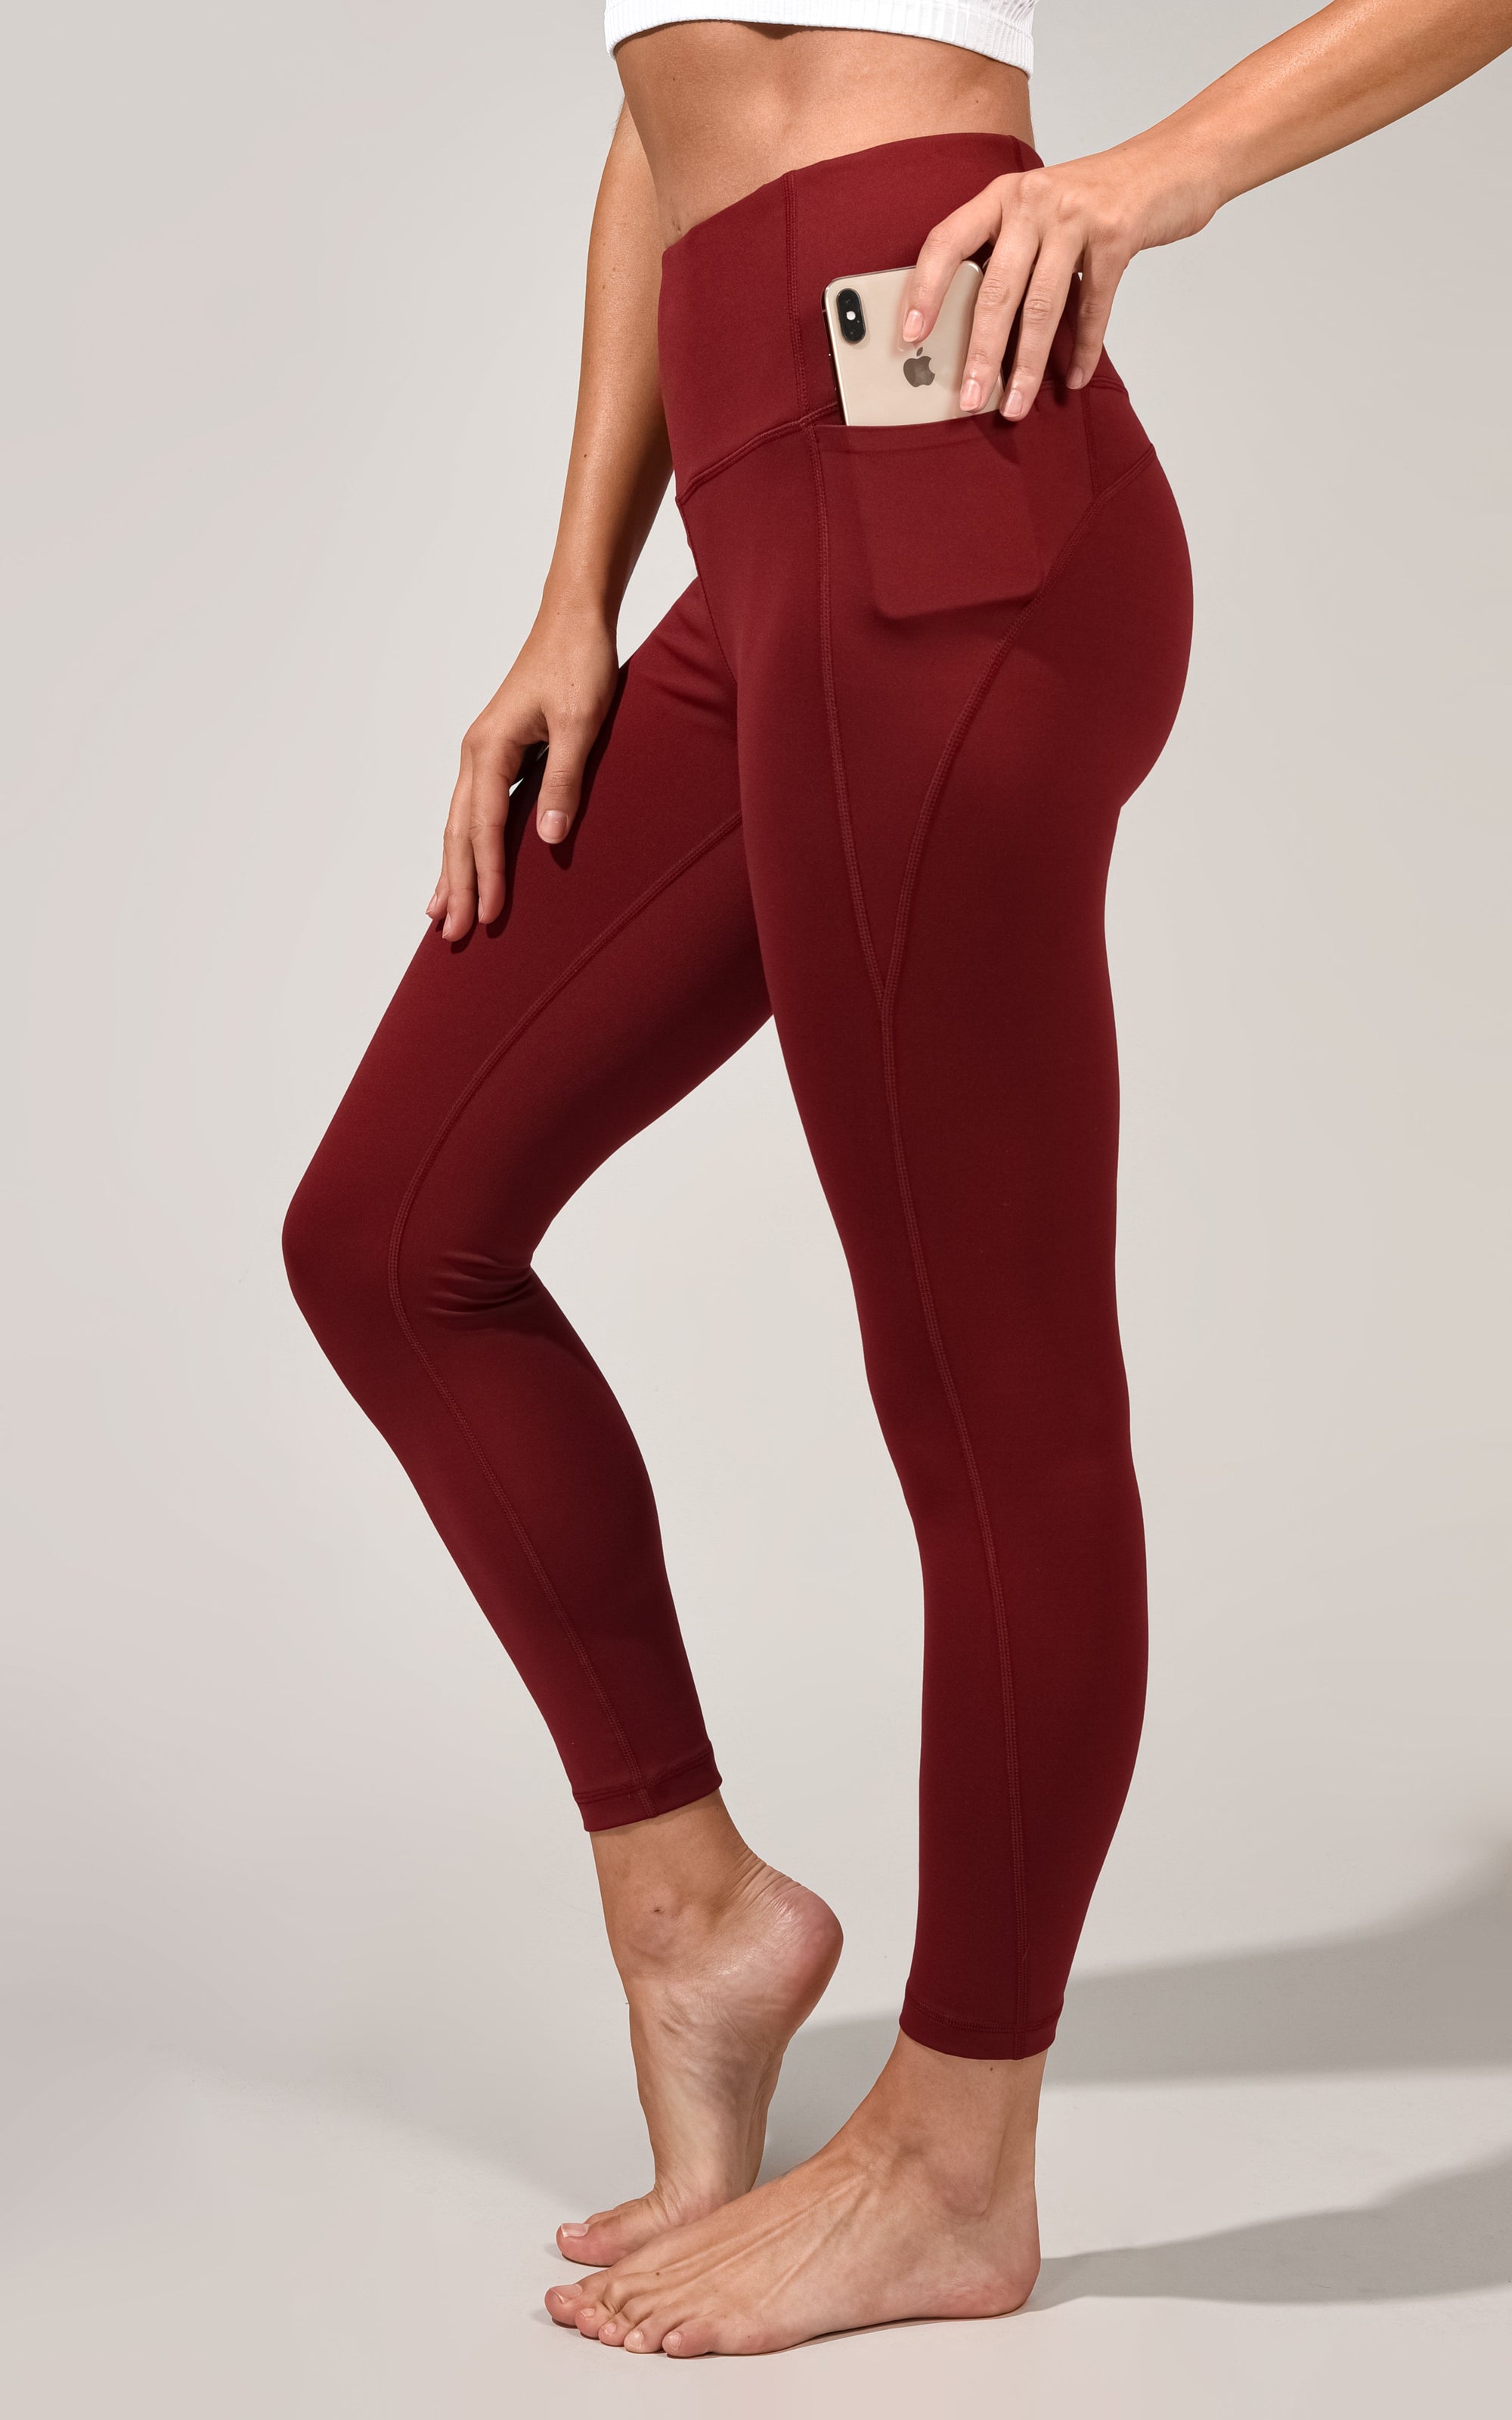 Yogalicious Lux High Waist Ankle Length Pants | NWT | Yogalicious Leggings  | NEW